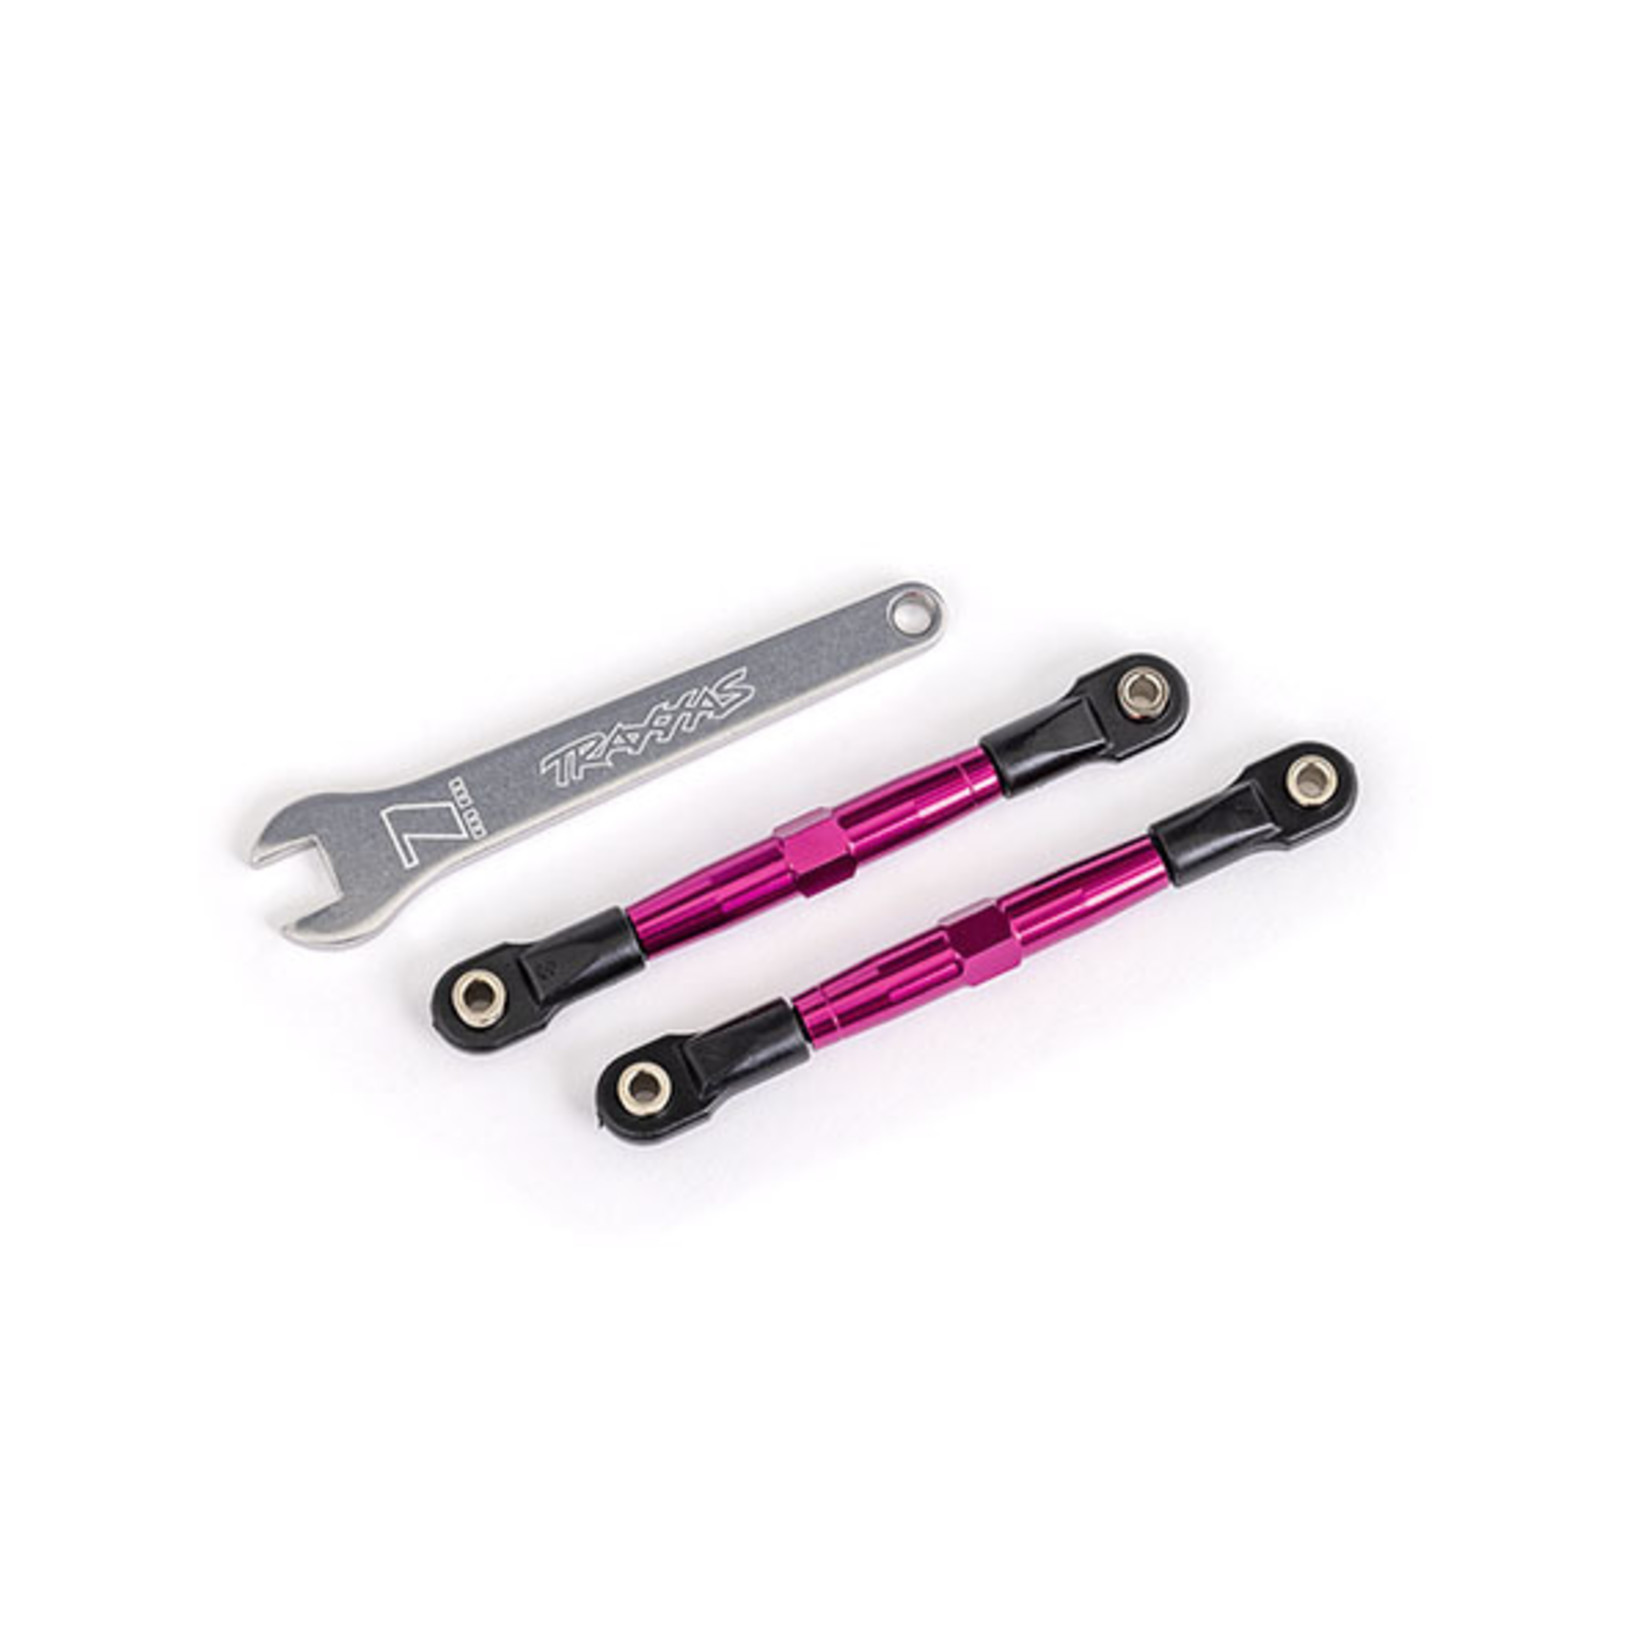 Traxxas 2445P - Toe links, front (TUBES pink-anodized, 707